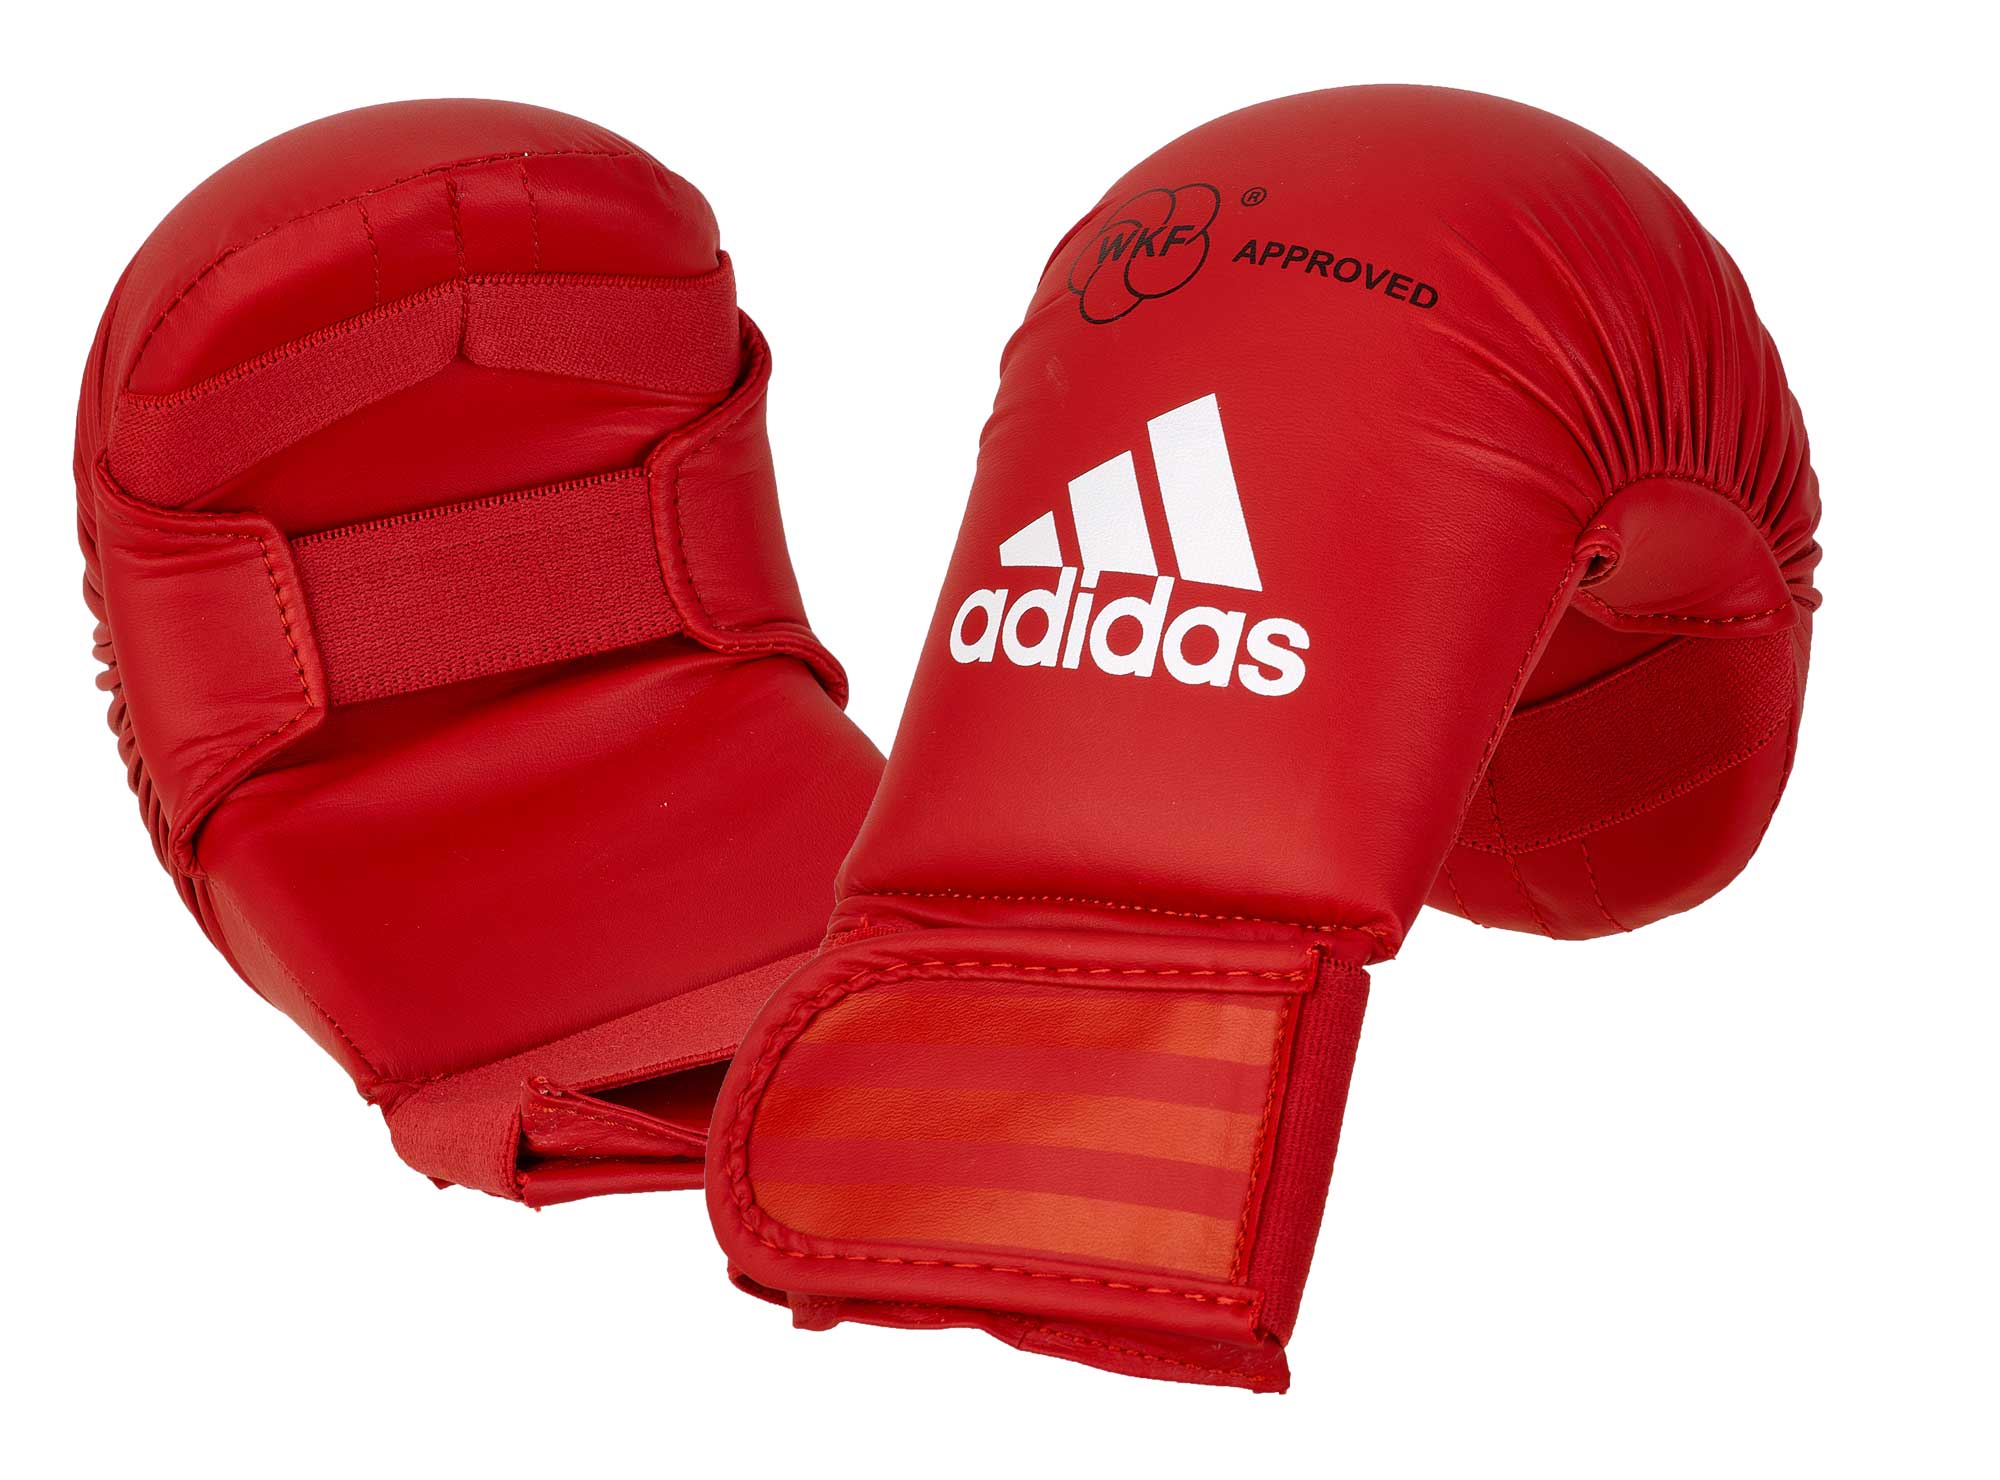 adidas kumite mitts WKF approved red 661.22